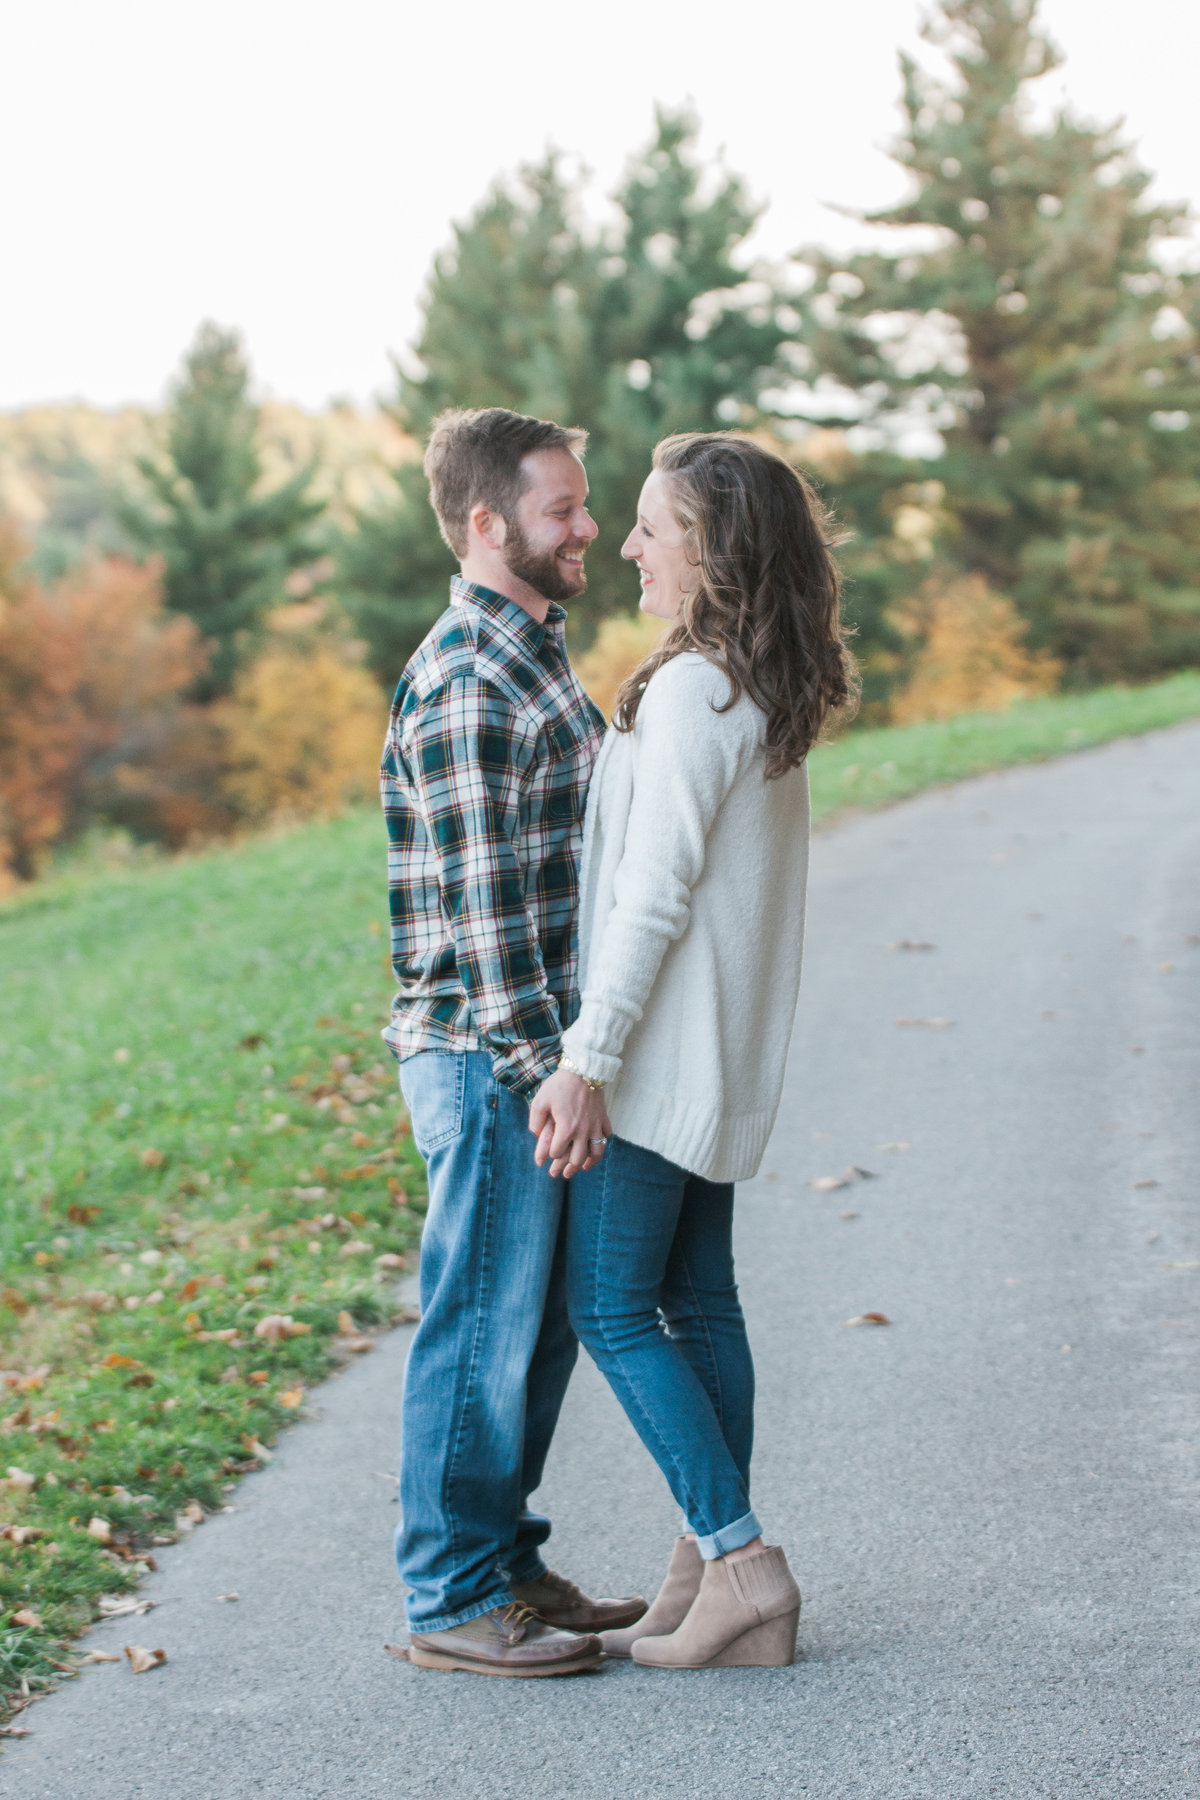 Moses Cone Manor Engagement Adventure on the Blue Ridge Parkway photographed by Boone Photographer Wayfaring Wanderer.